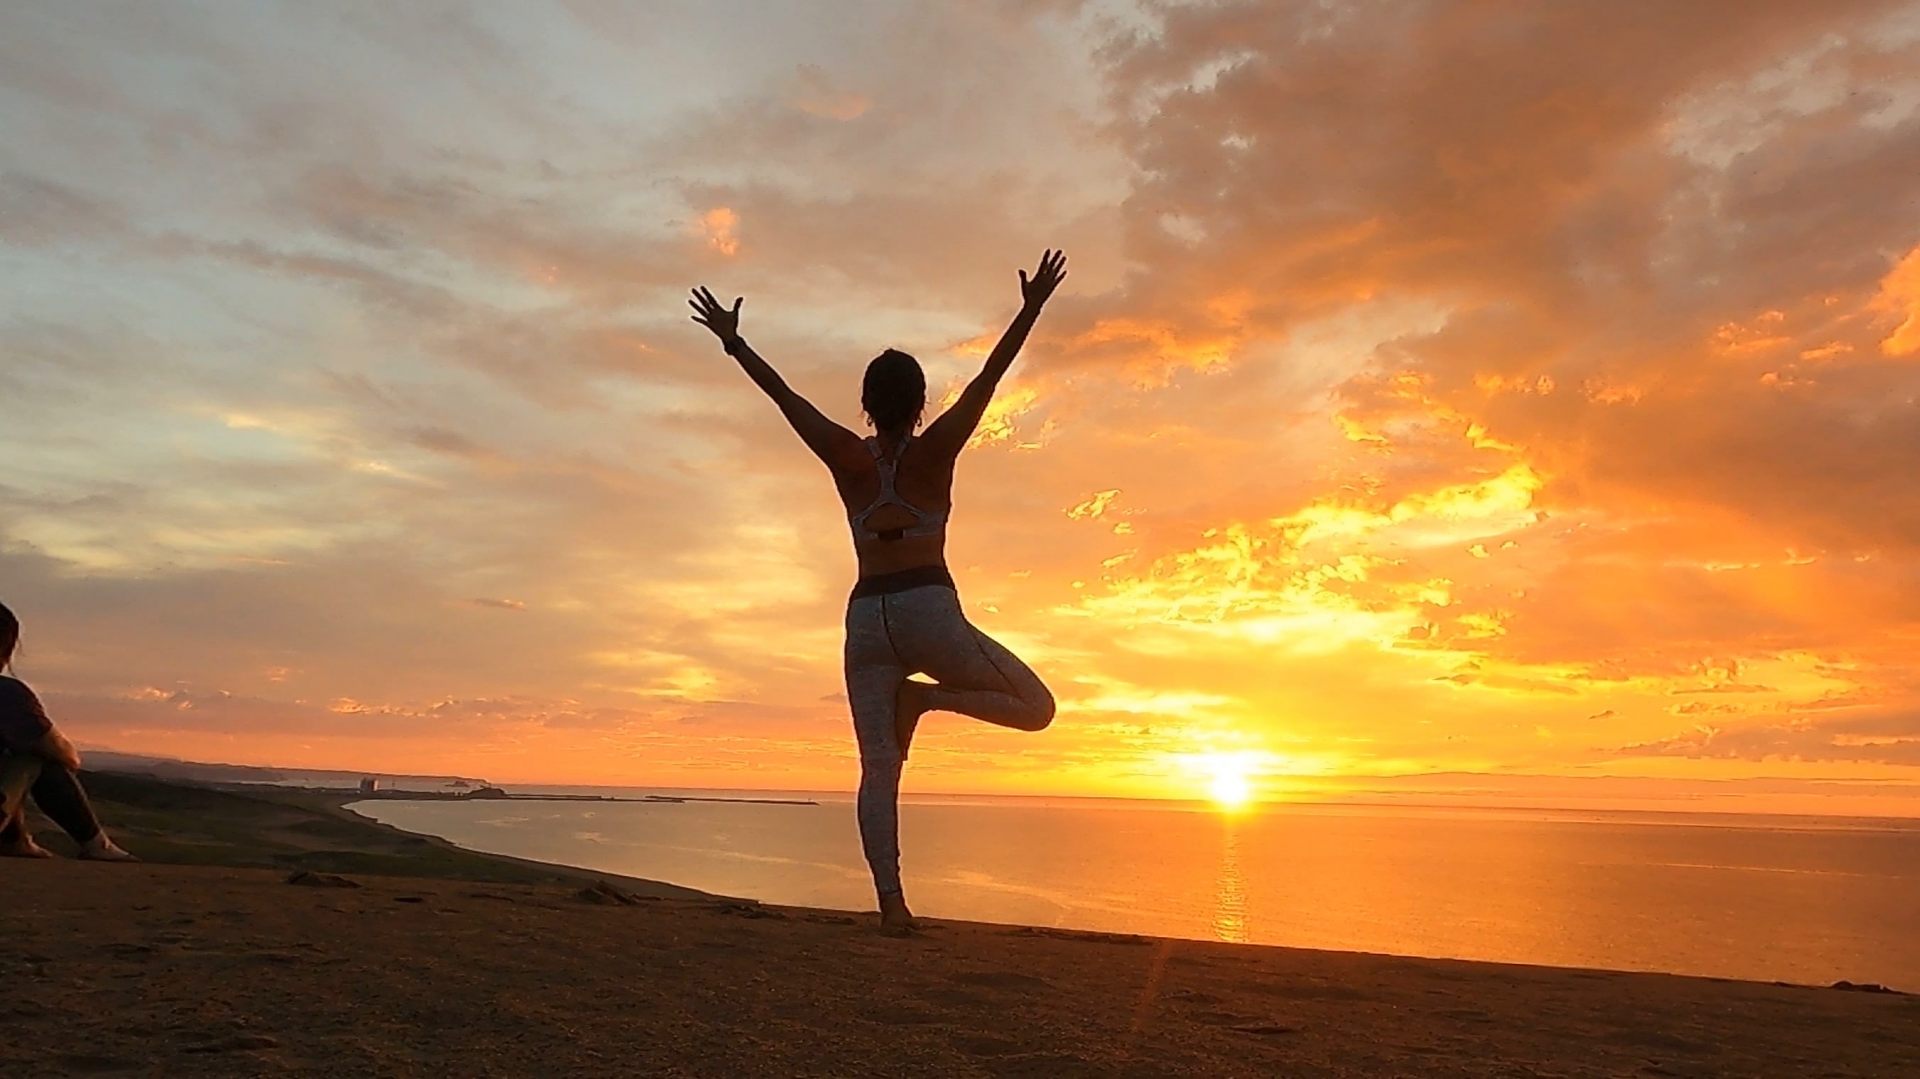 Sunset Yoga on Tottori Sand Dunes. Capture the power of Mother Nature.